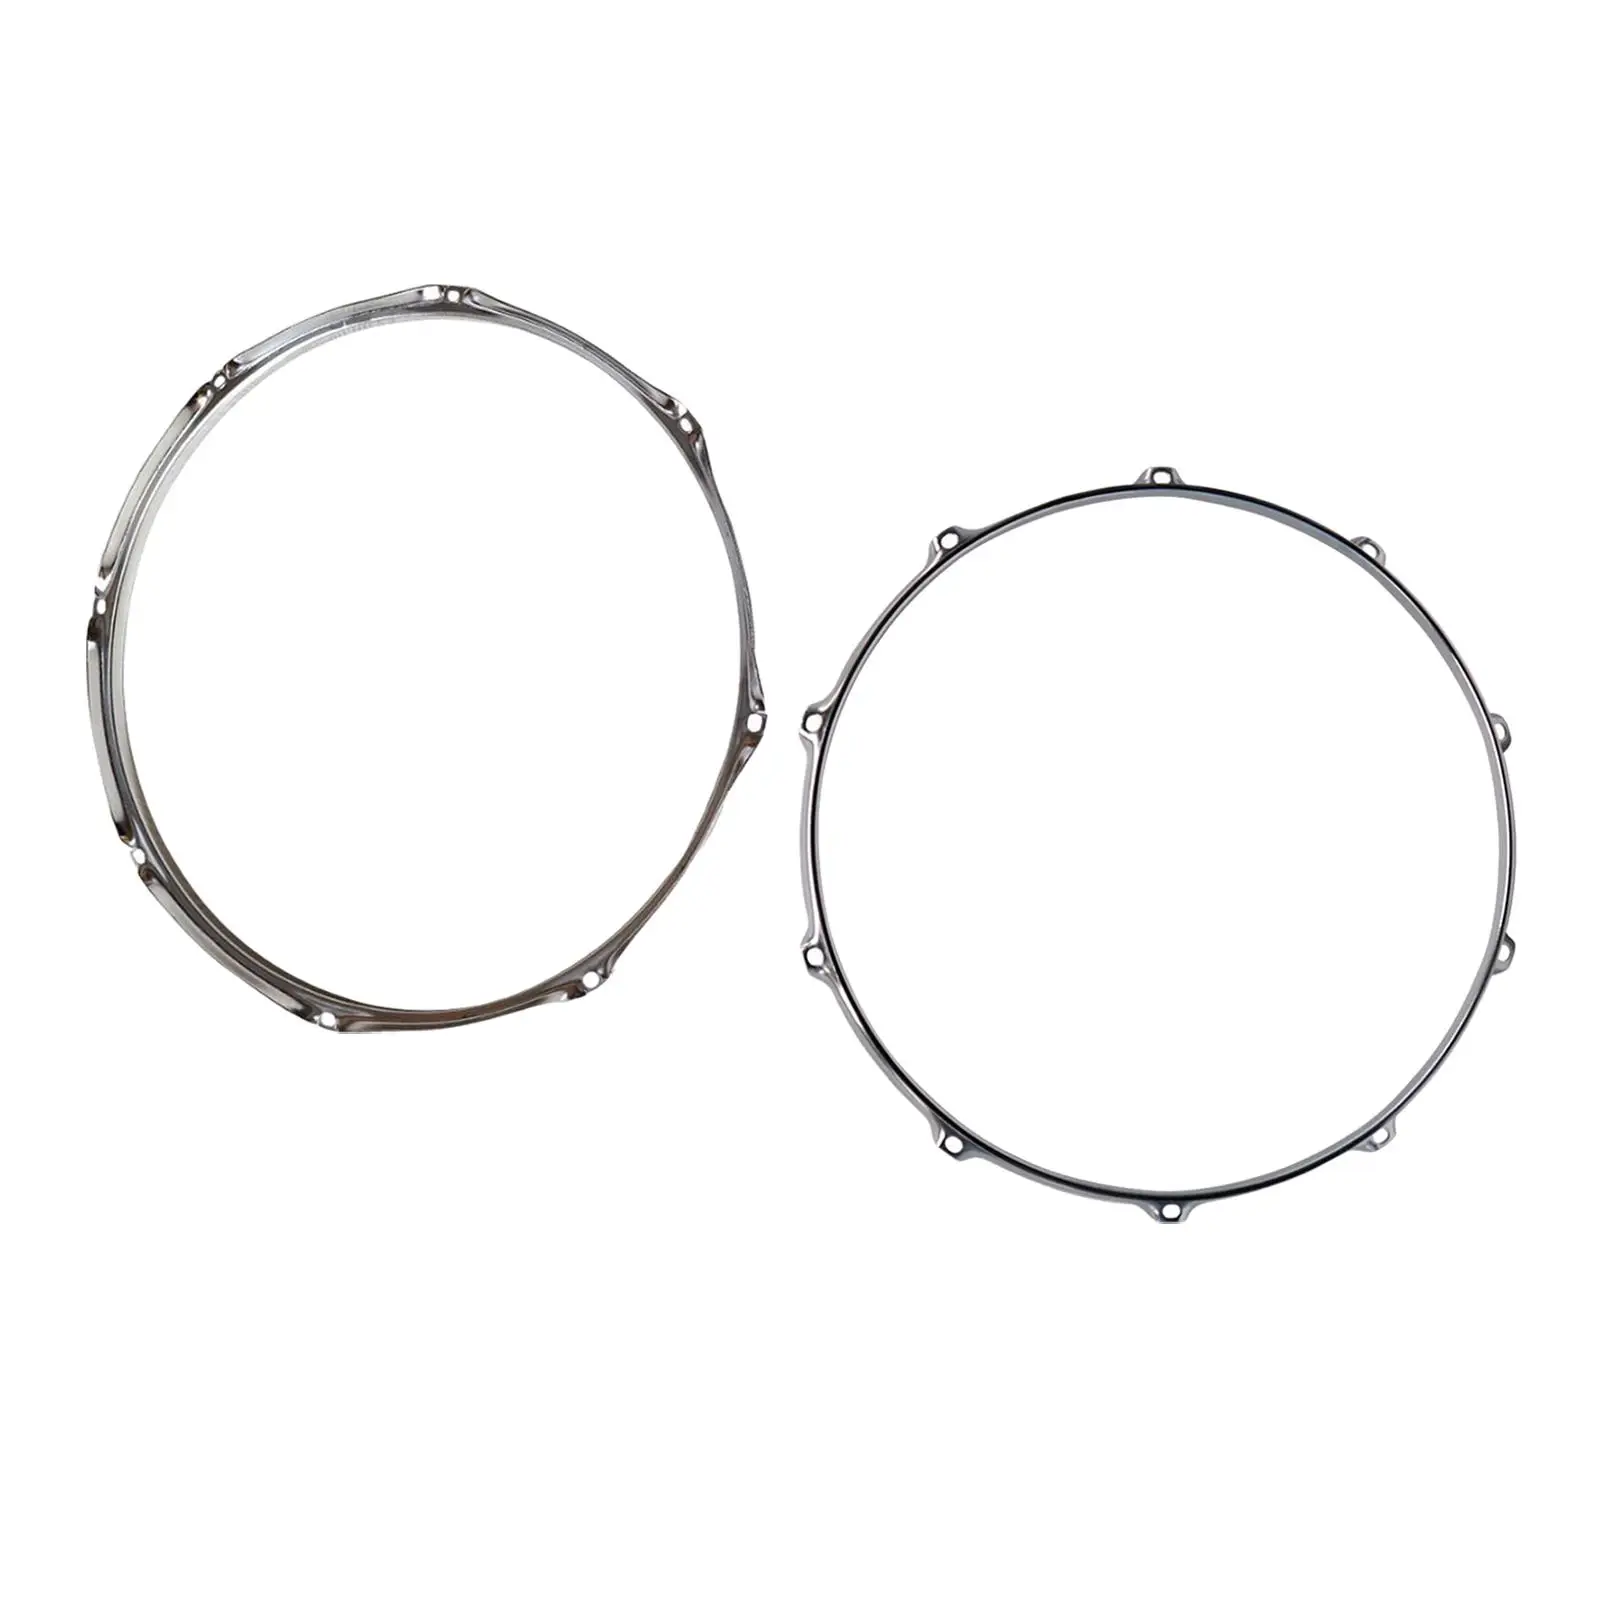 Rim Batter Hoop Percussion Instrument Parts Replacement Heavy Duty 14 inch 8 Lug Batter Hoop Drum Hoop for Instrument Office